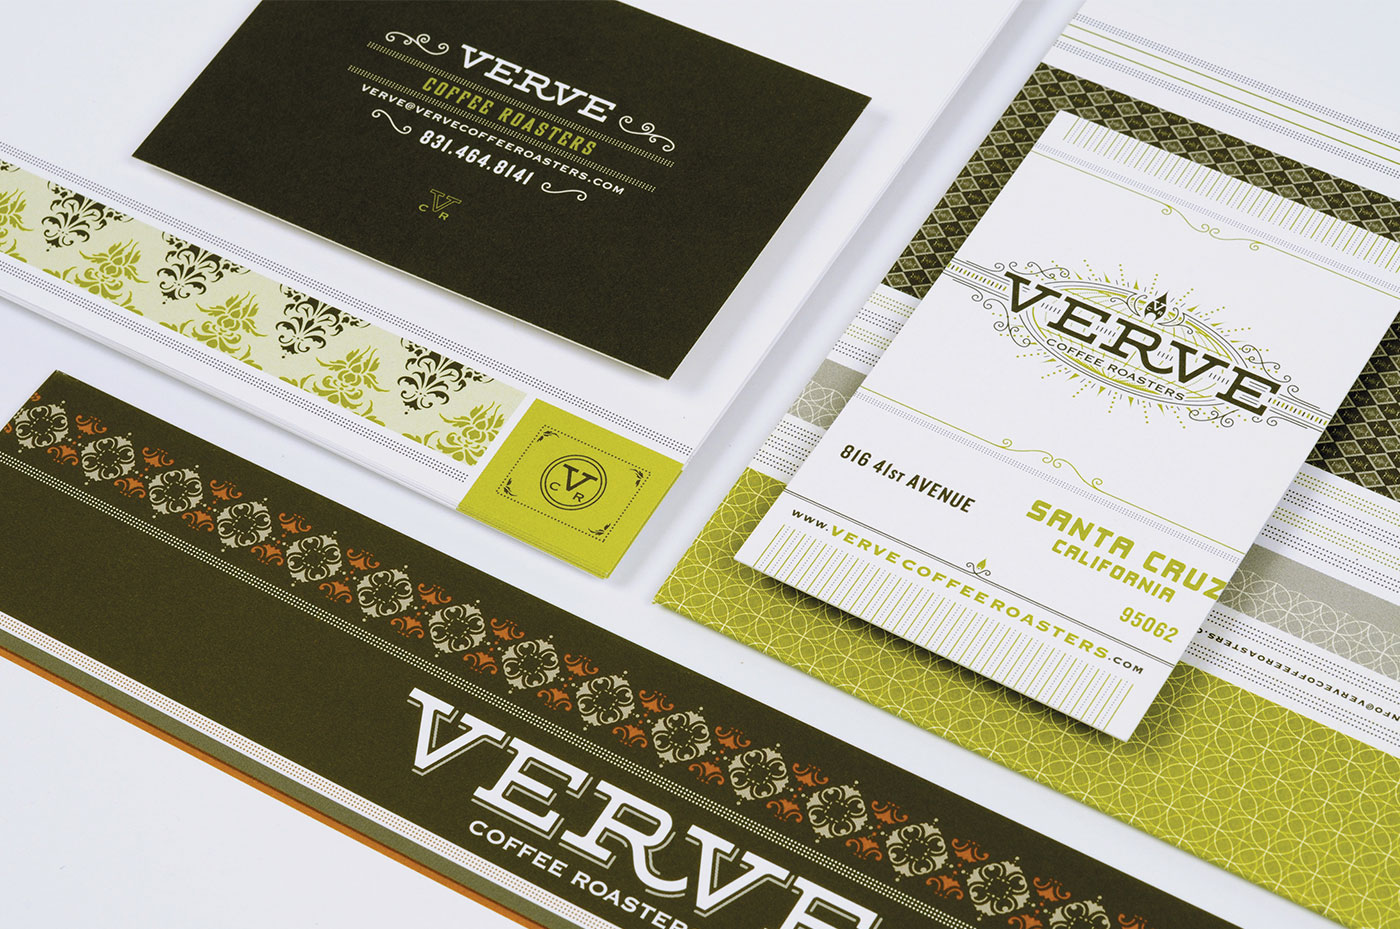 Verve Coffee Roasters business system